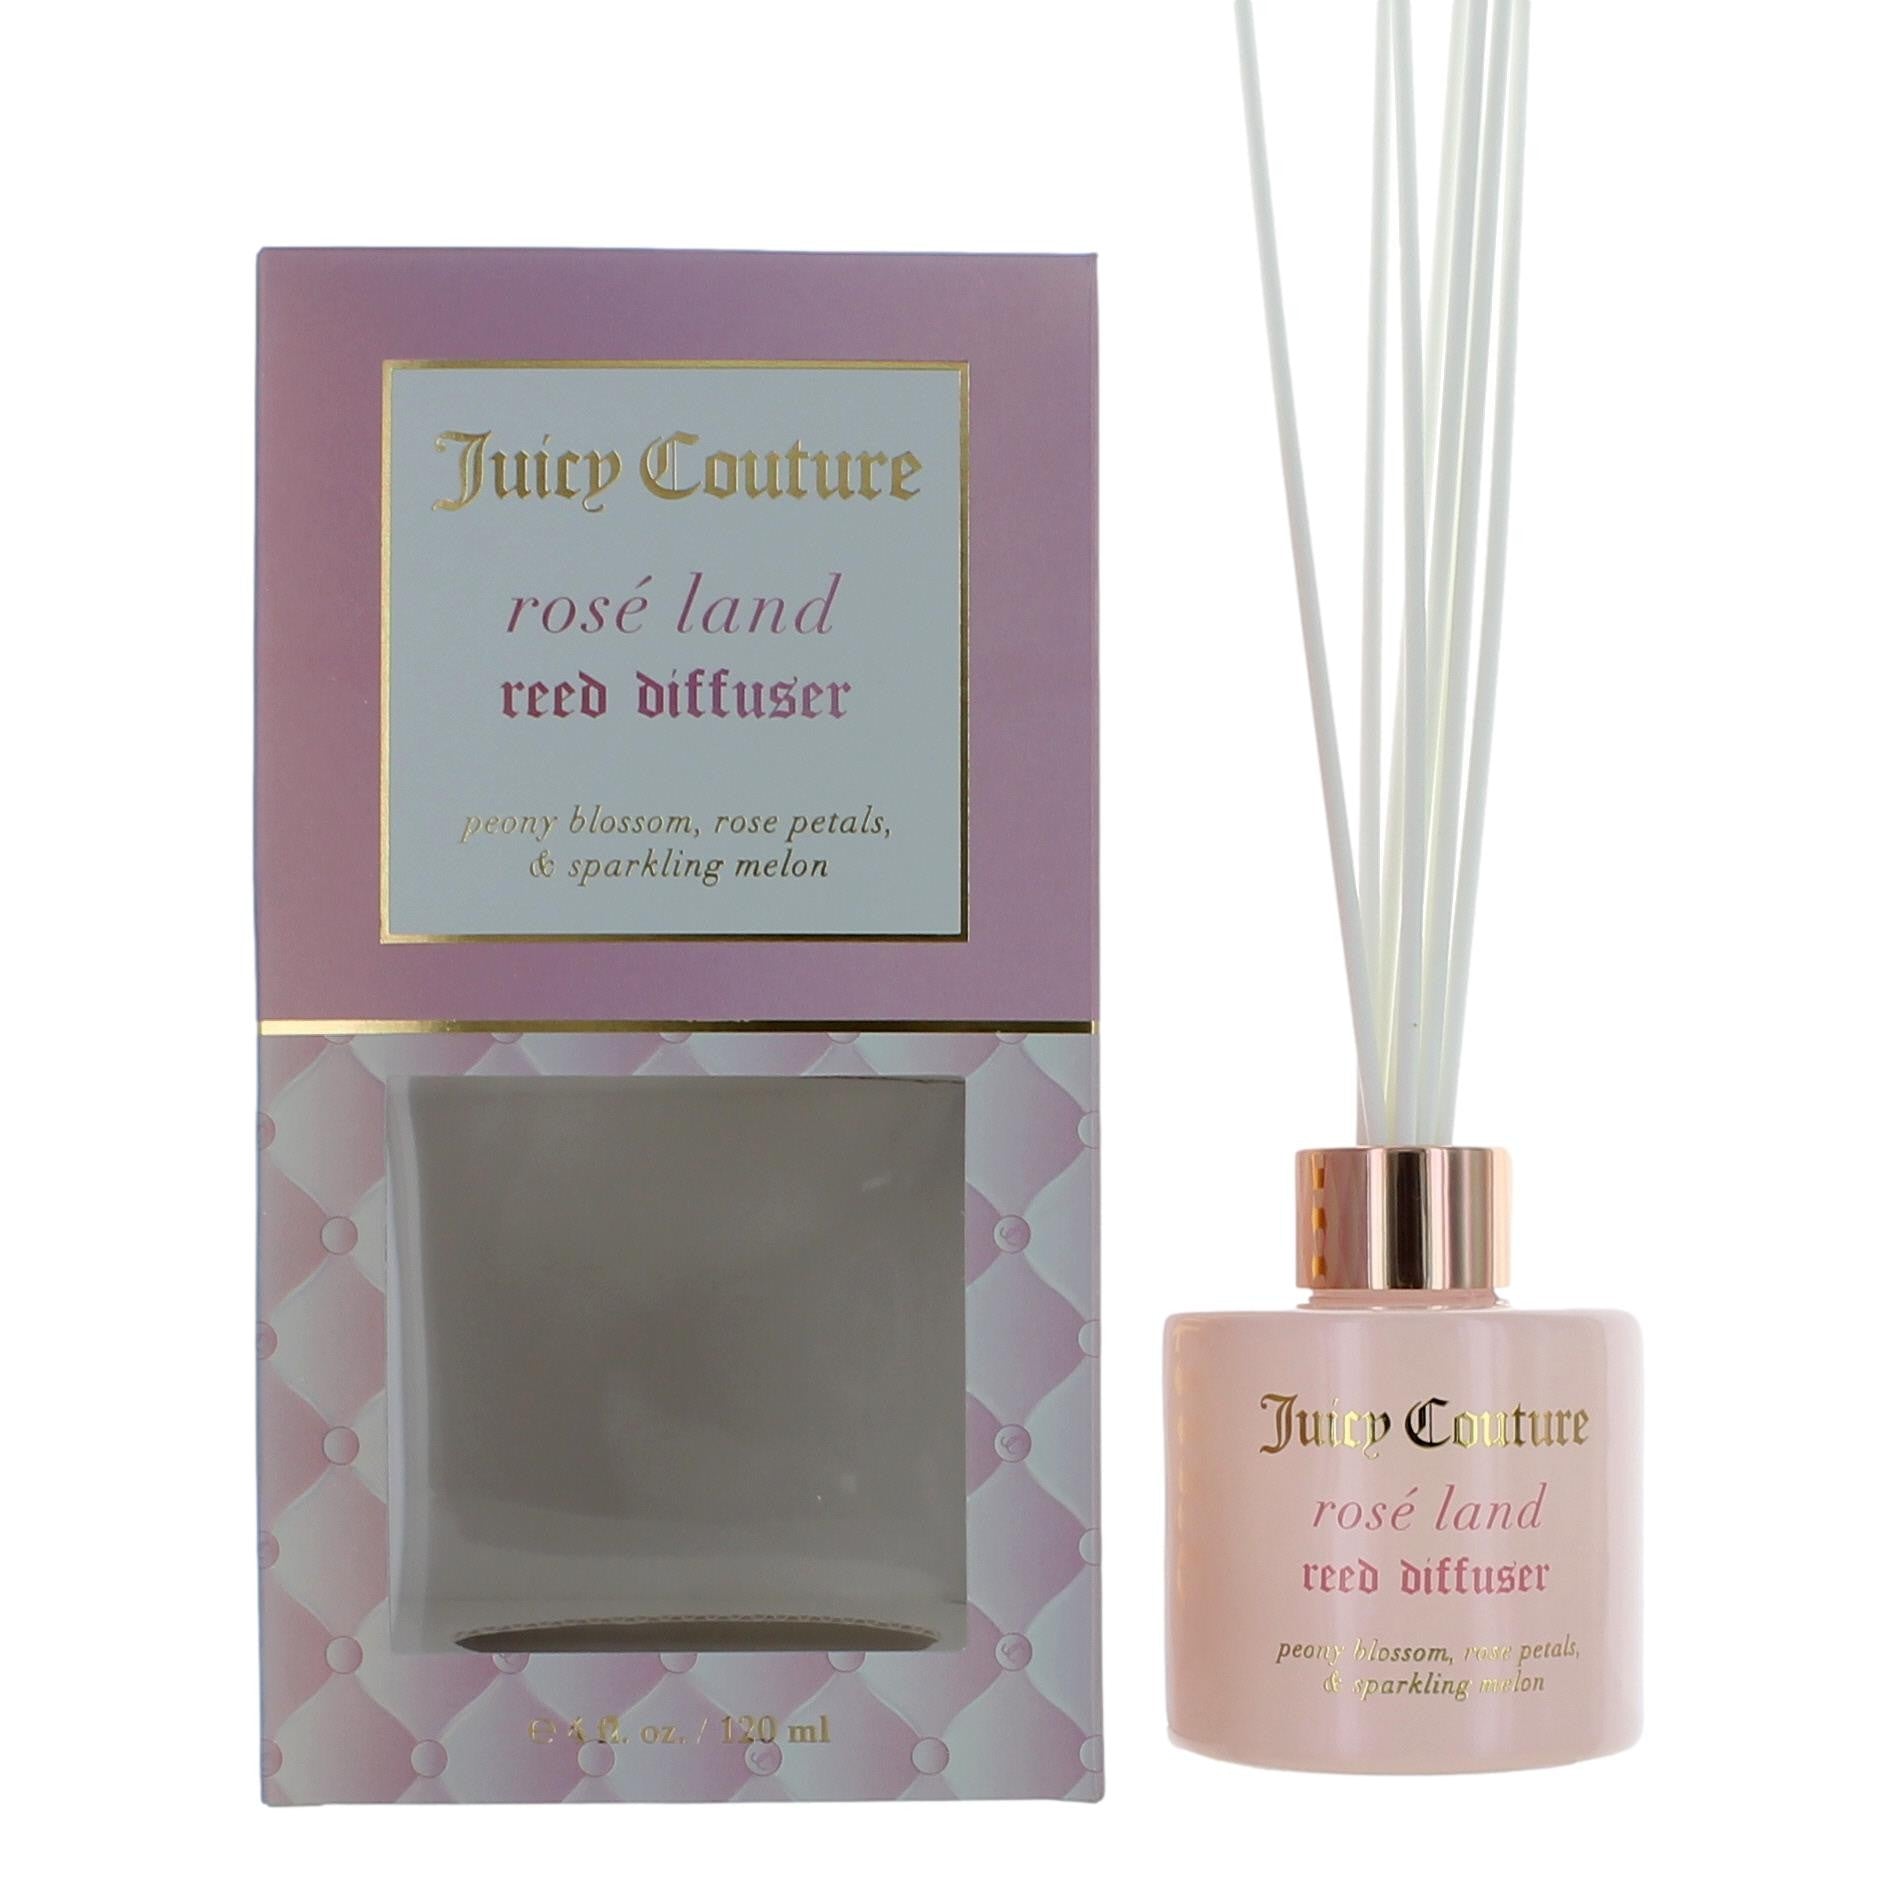 Bottle of Rose Land by Juicy Couture, 4 oz Reed Diffuser